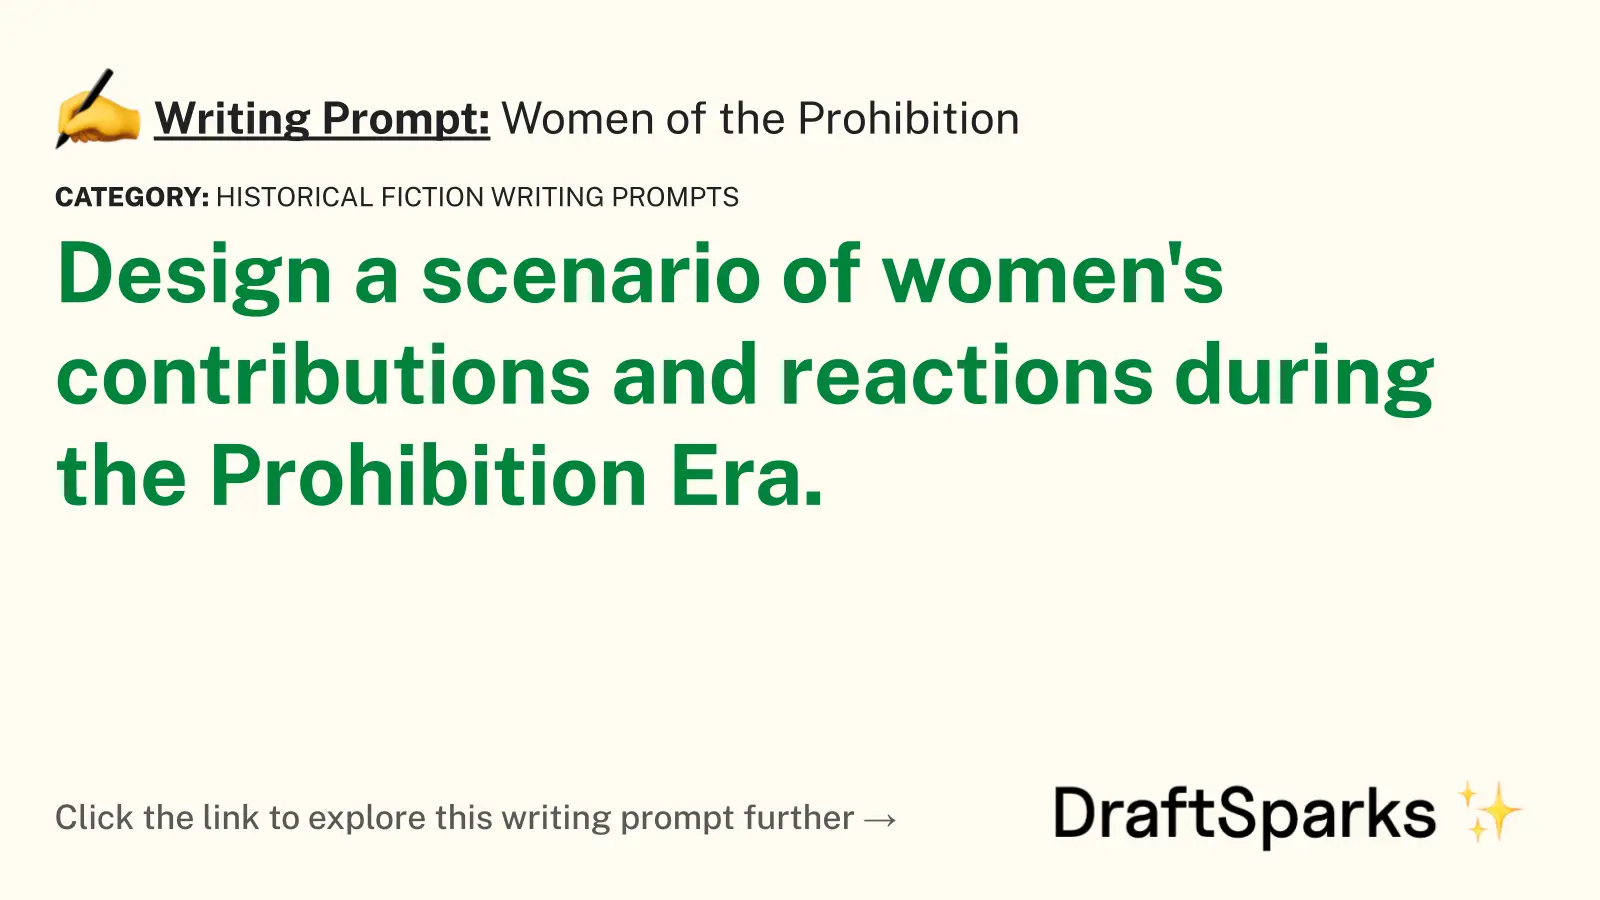 Women of the Prohibition